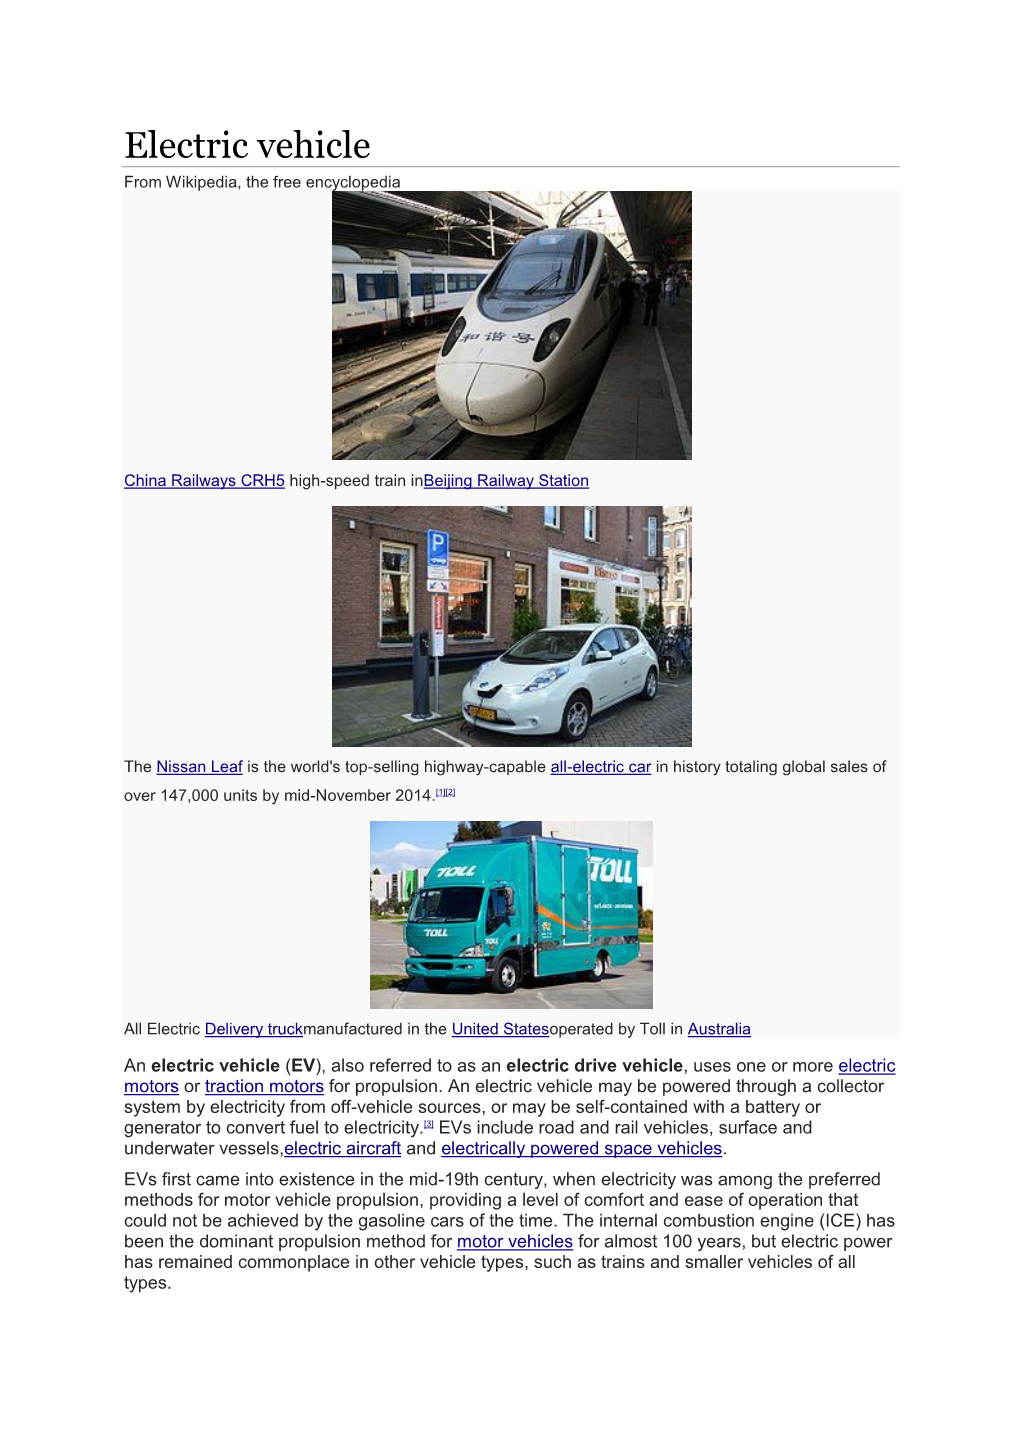 Electric Vehicle from Wikipedia, the Free Encyclopedia